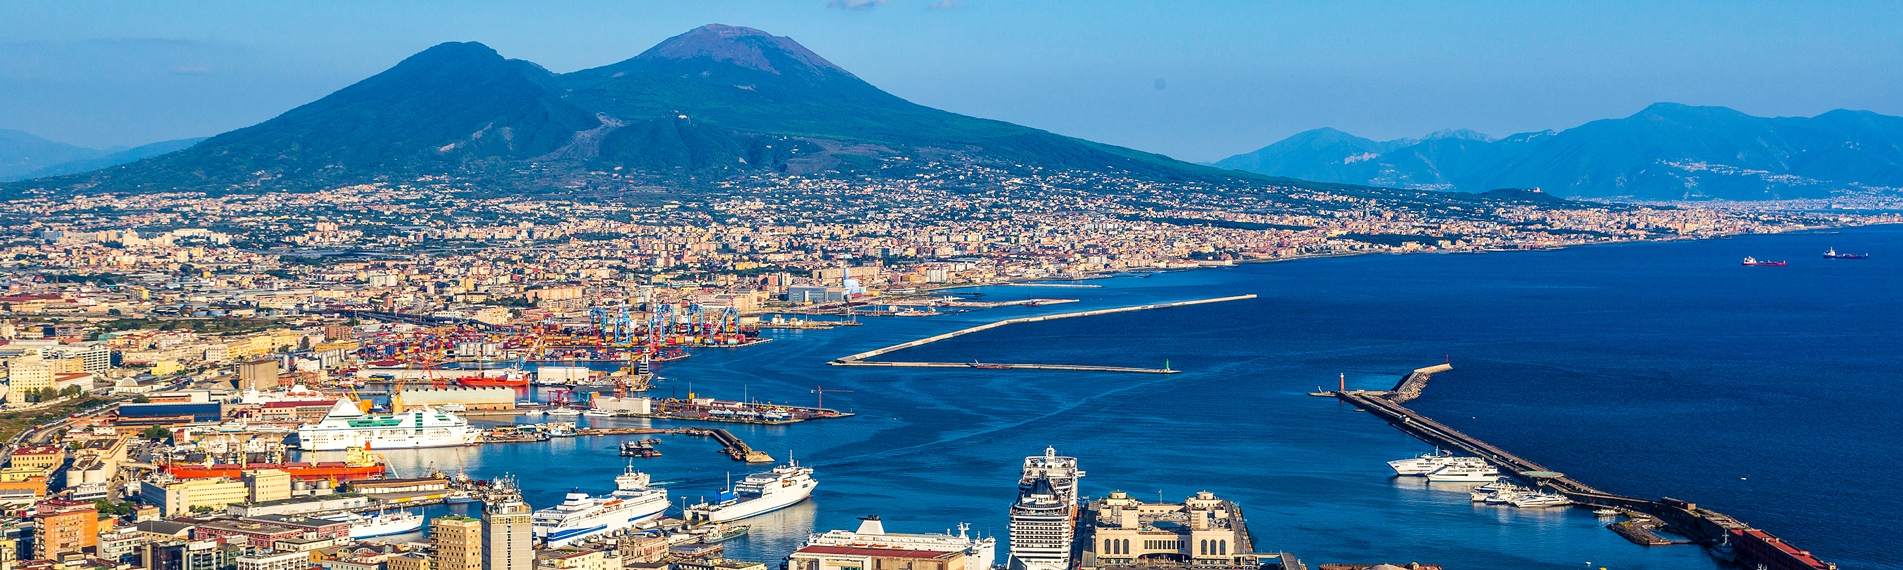 View of the Gulf with Mount Vesuvius in the distance, Naples, Italy.